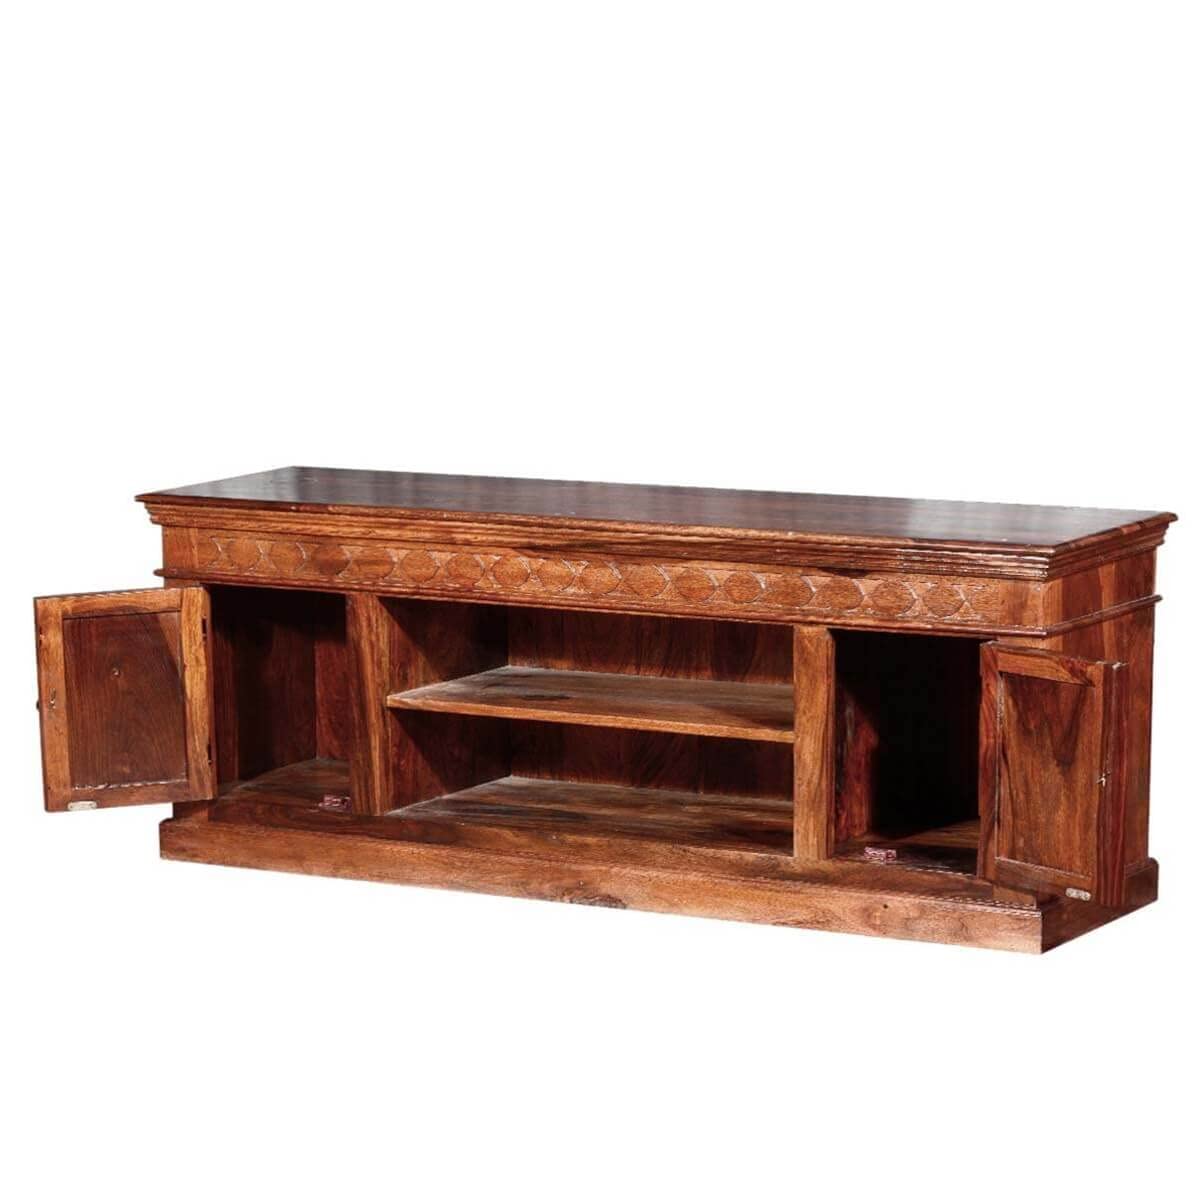 Woodmarwar Solid Sheesham Wood Entertainment Tv Unit With Storage Honey Finish For Home & Office Furniture